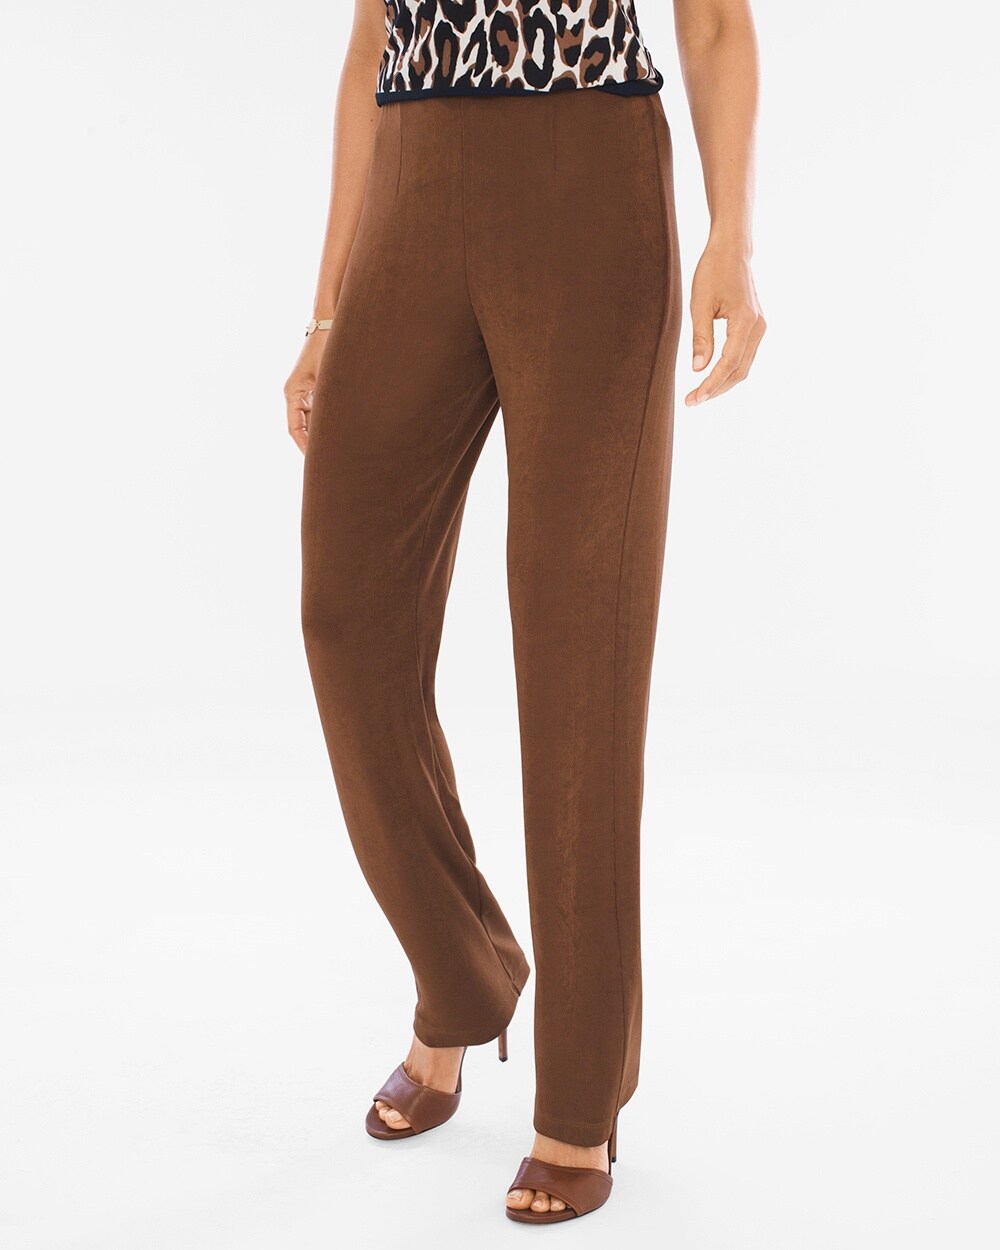 Travelers Classic No Tummy Pants in Chestnut